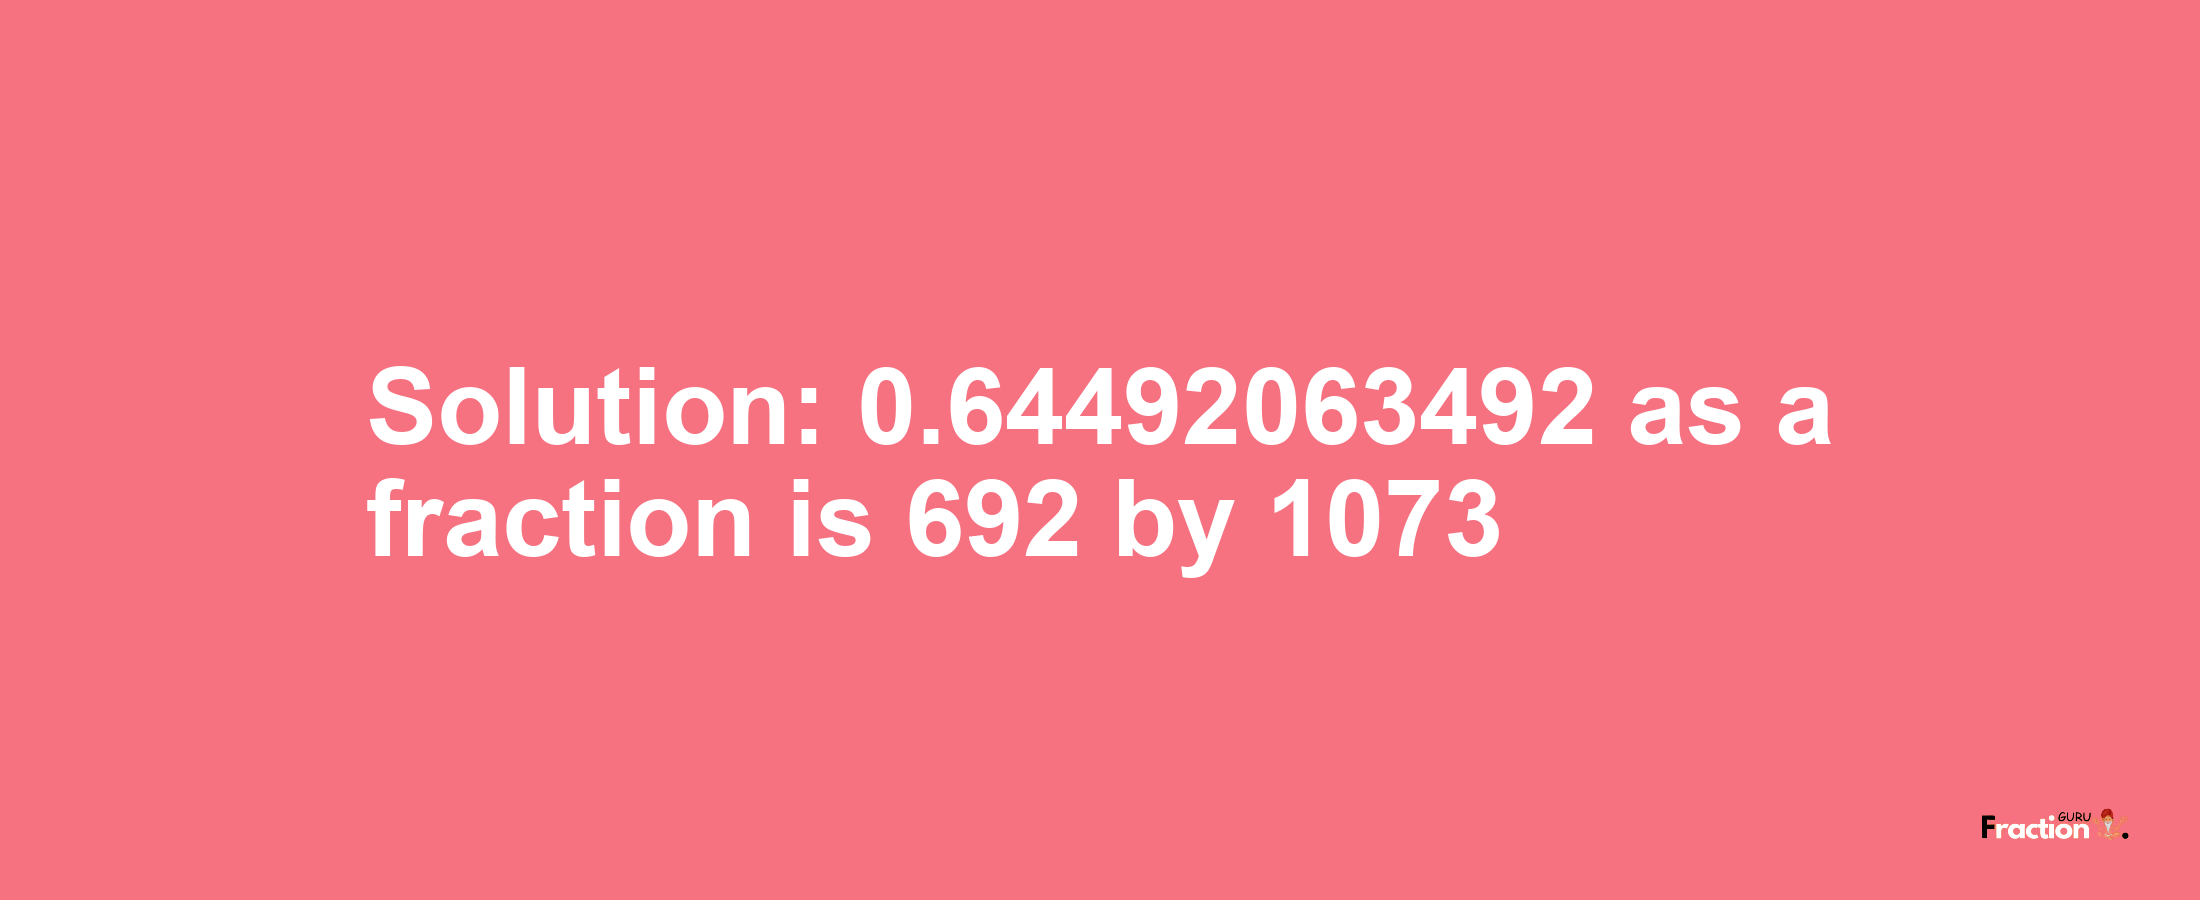 Solution:0.64492063492 as a fraction is 692/1073